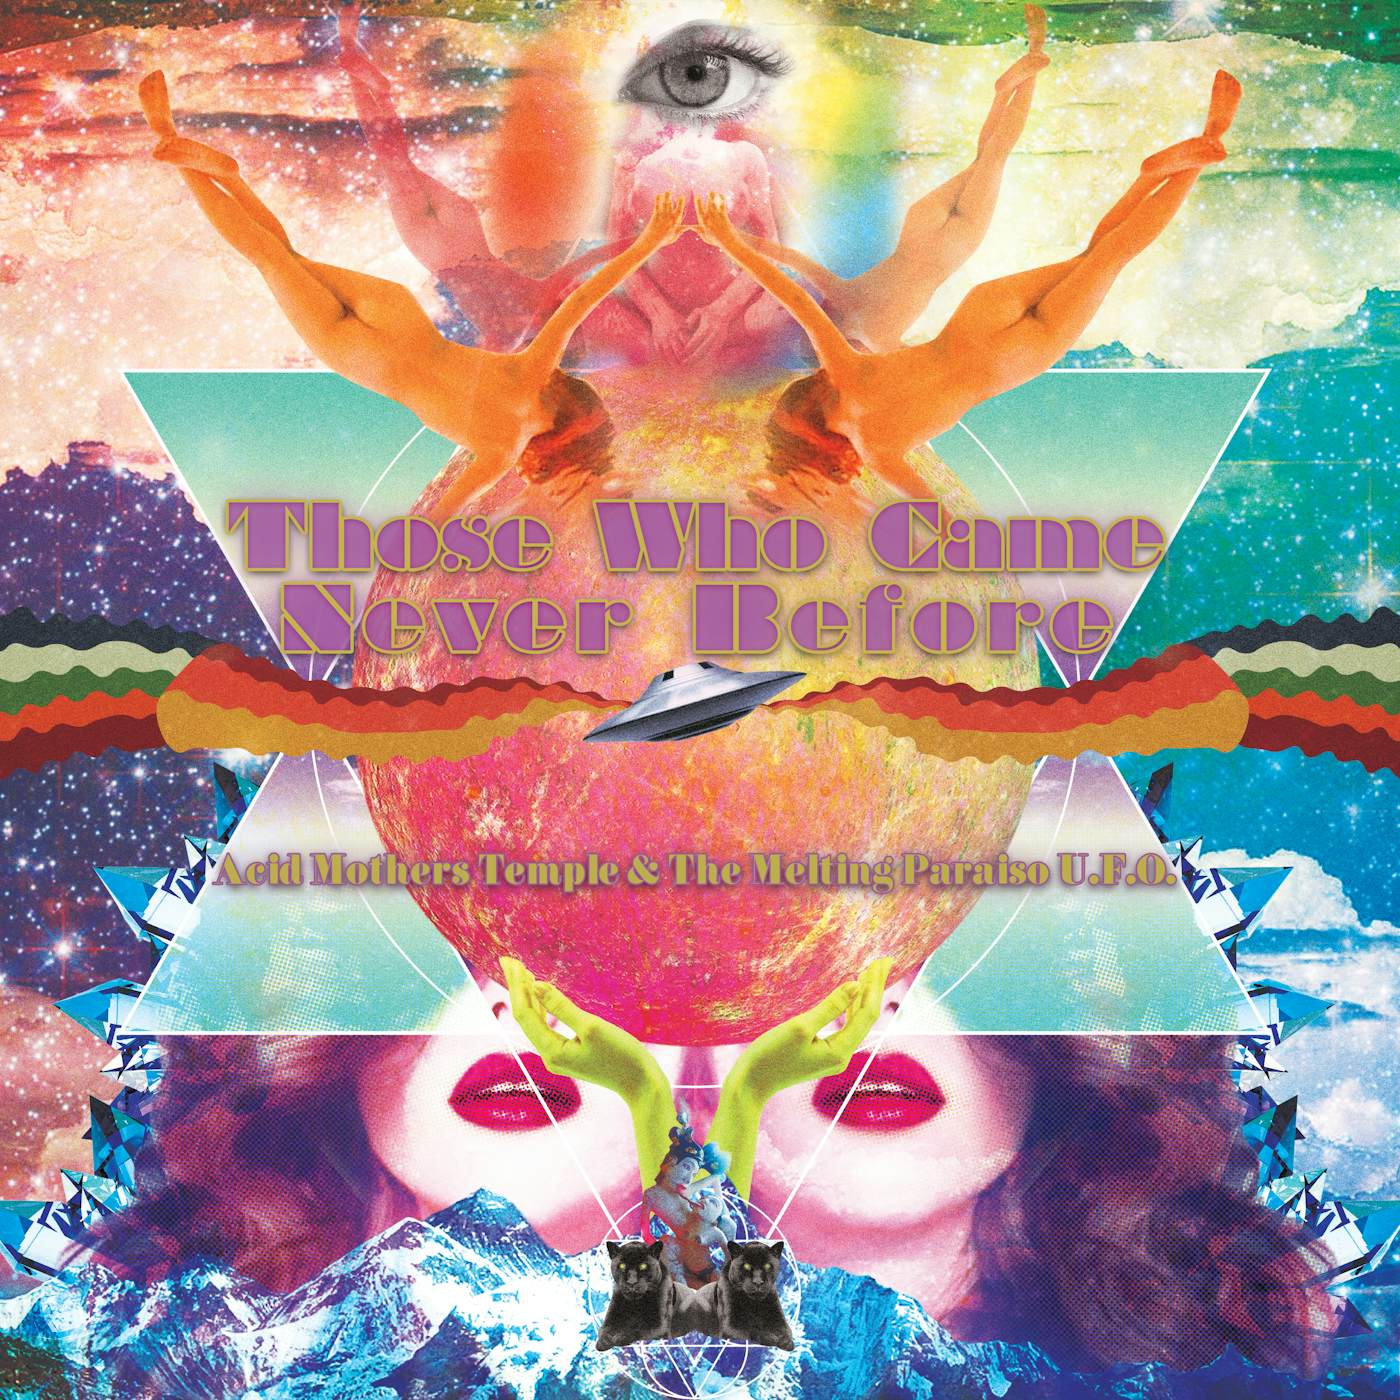 Acid Mothers Temple & Melting Paraiso U.F.O. Those Who Came Never Before Vinyl Record